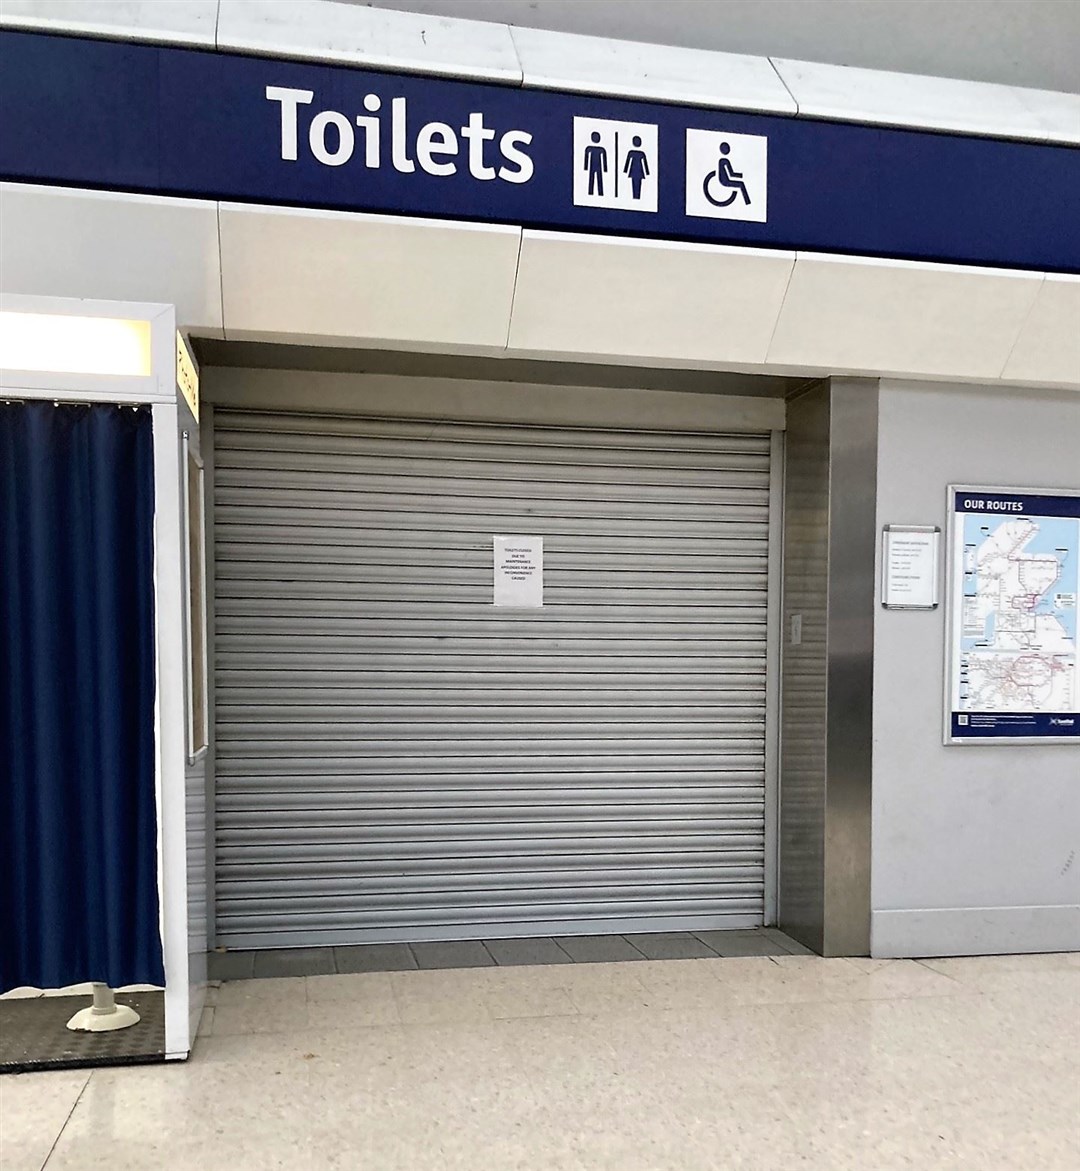 The station's toilets were, however, closed when Louise went to check.